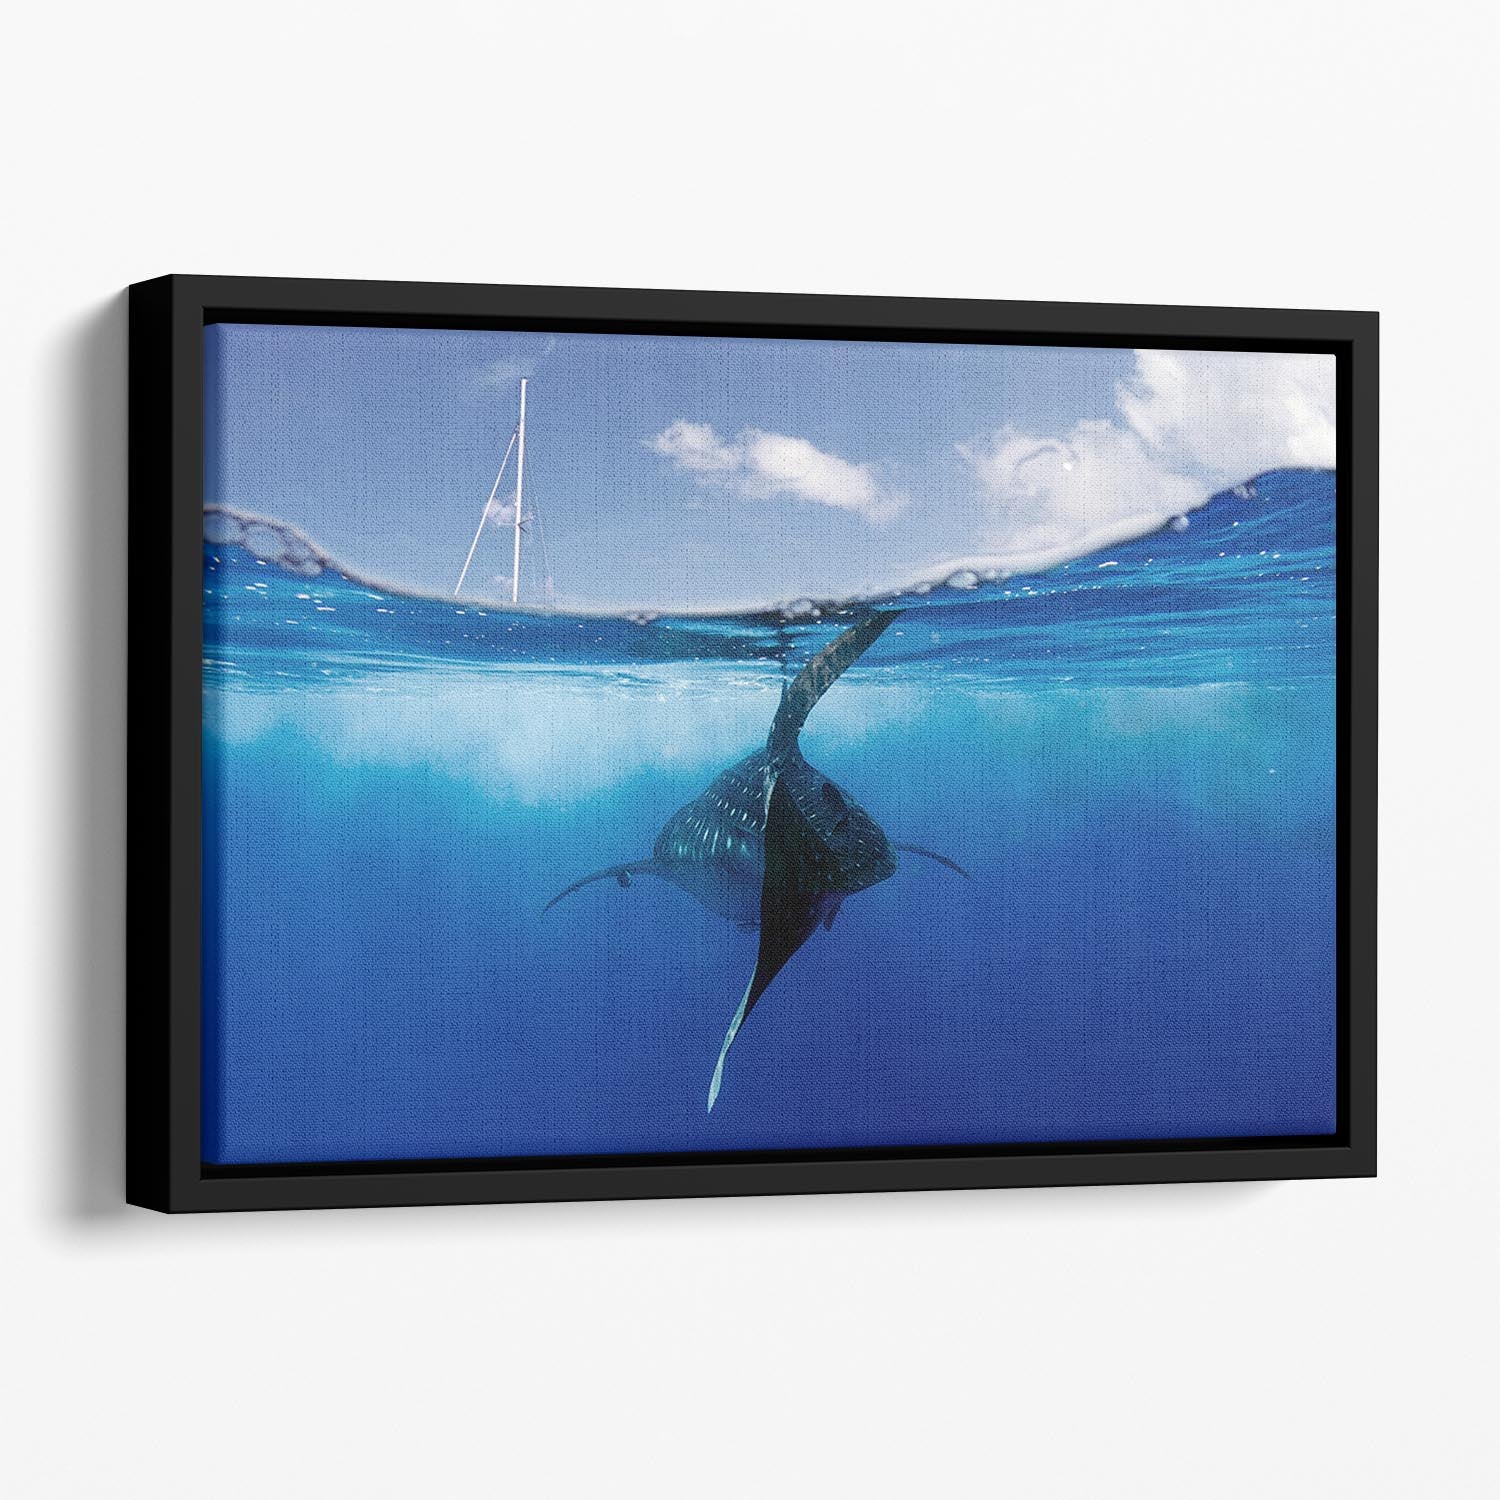 Collision Course Floating Framed Canvas - Canvas Art Rocks - 1